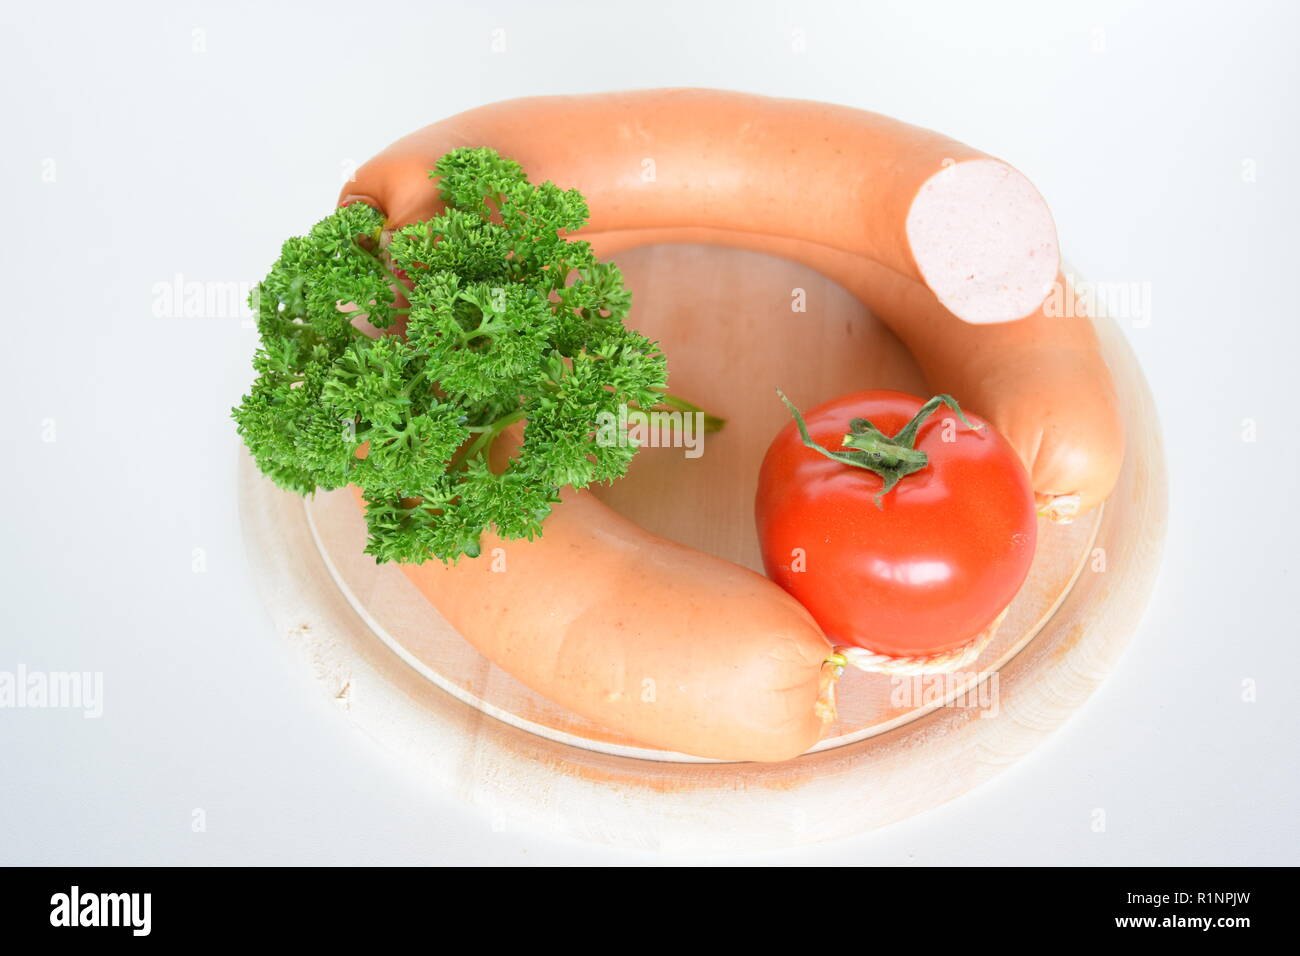 - images stock Fleischwurst Alamy hi-res photography and